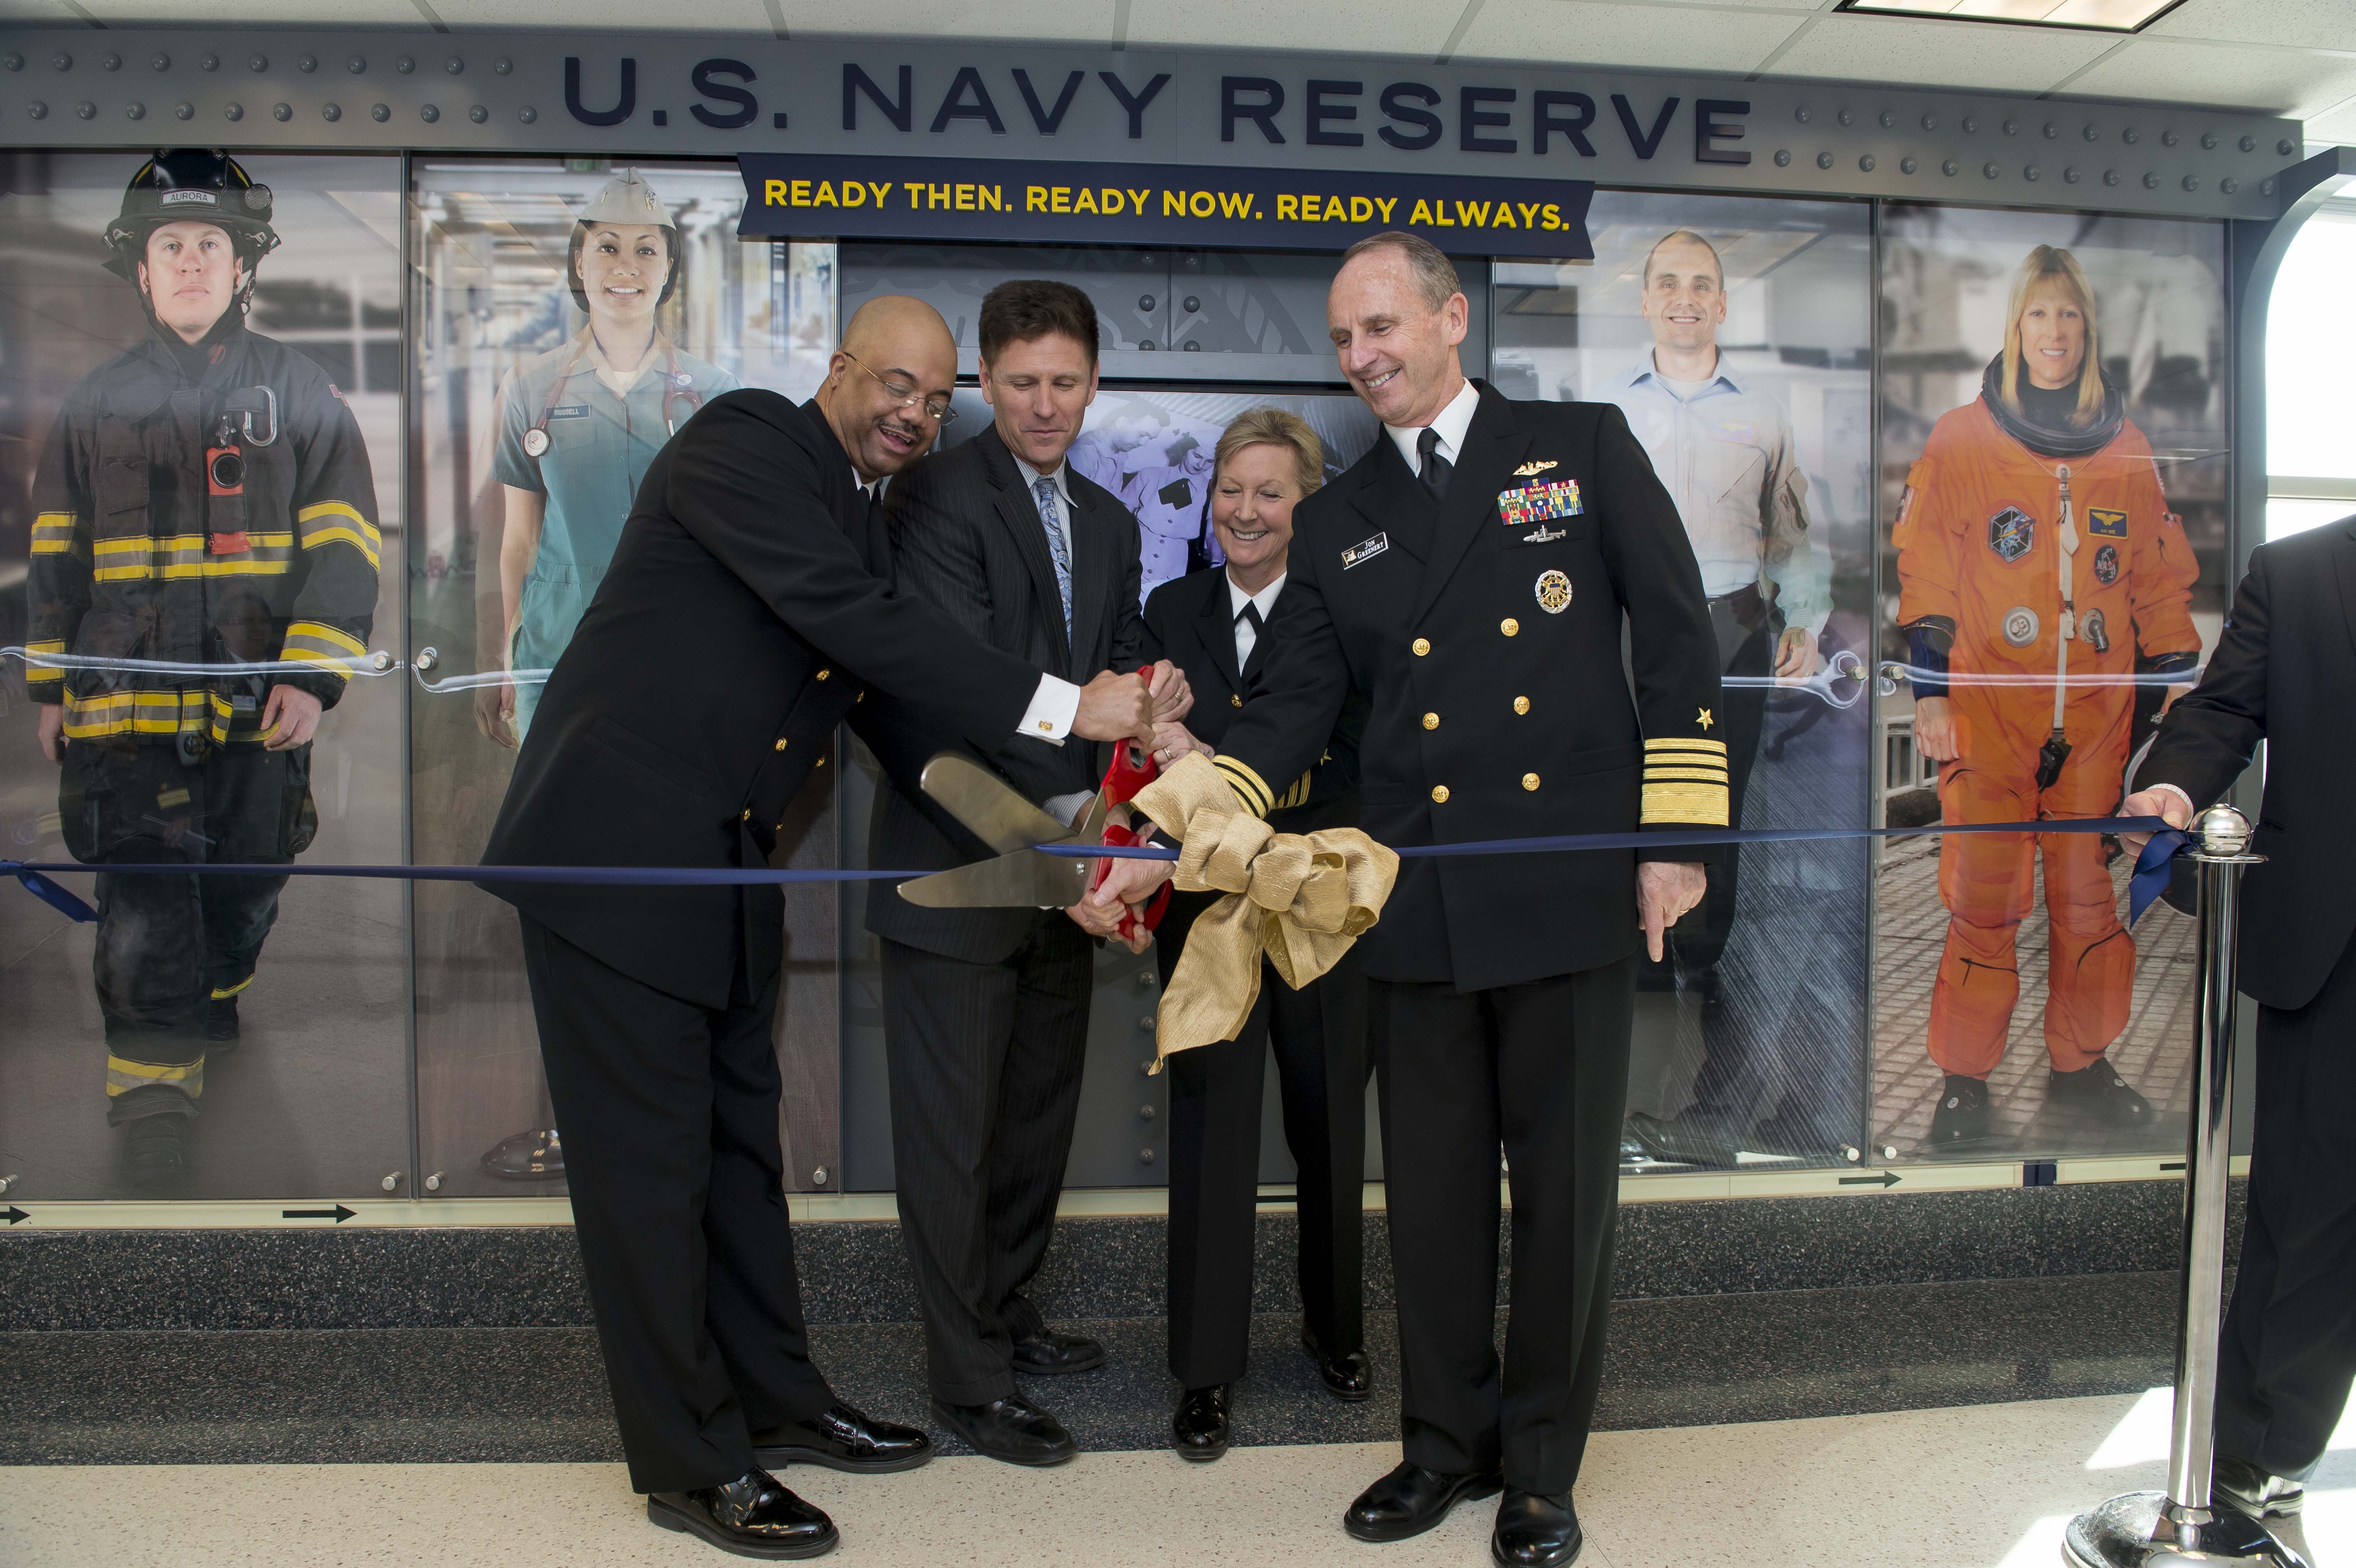 Chief of Naval Operations (CNO) Adm. Jonathan Greenert, Chief of Navy Reserve Vice Adm. Robin Braun, Assistant Secretary of the Navy for Manpower and Reserve Affairs Juan Garcia and Navy Reserve Force Master Chief C.J. Mitchell cut a ribbon in front of the new Centennial of the U.S. Navy Reserve display in the Pentagon on March 2, 2015. US Navy Photo